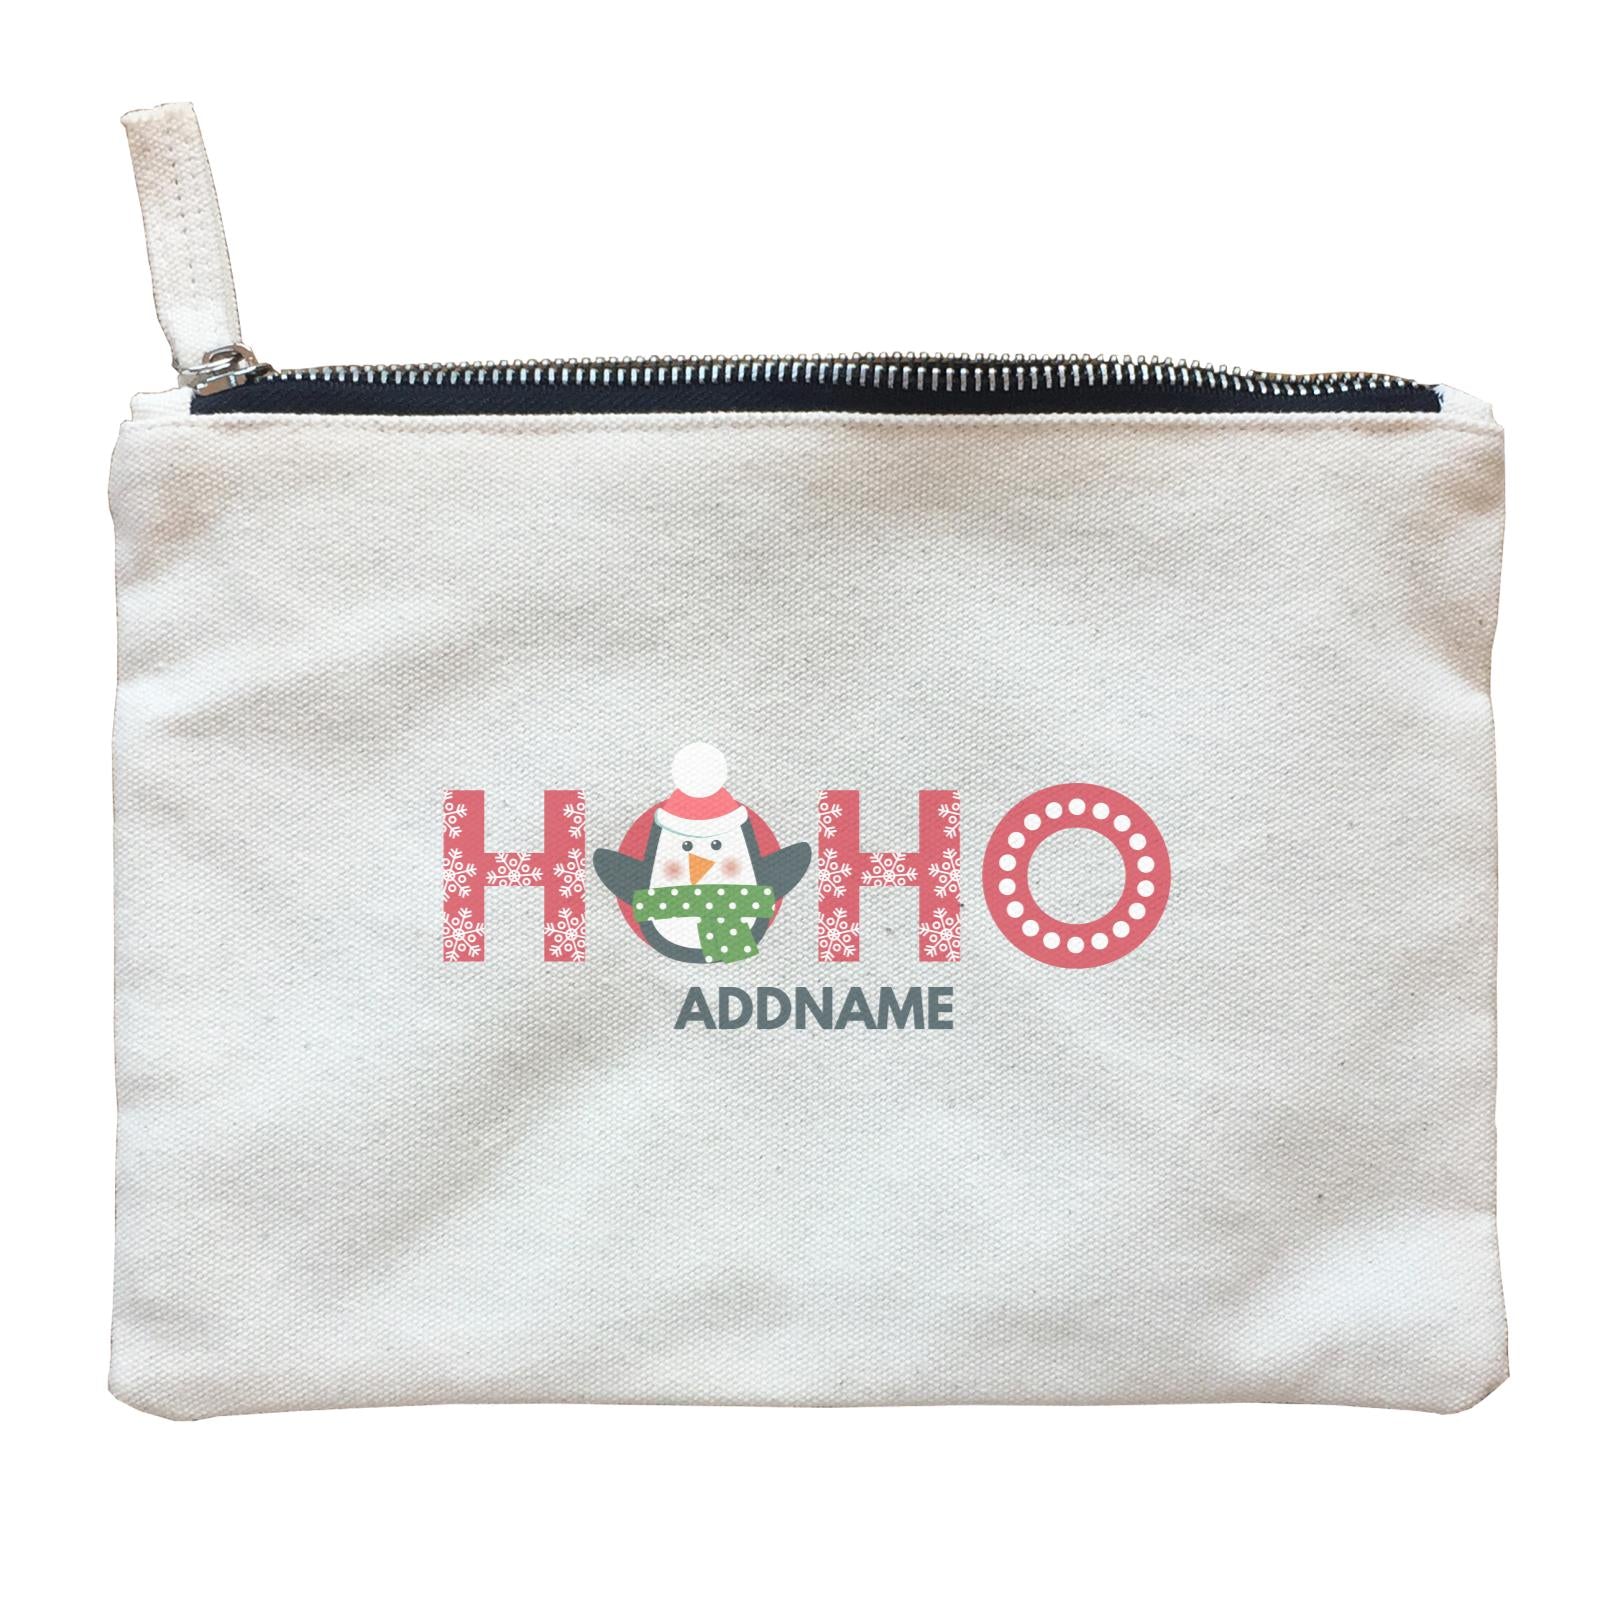 Christmas HOHO With Penguin Addname Accessories Zipper Pouch